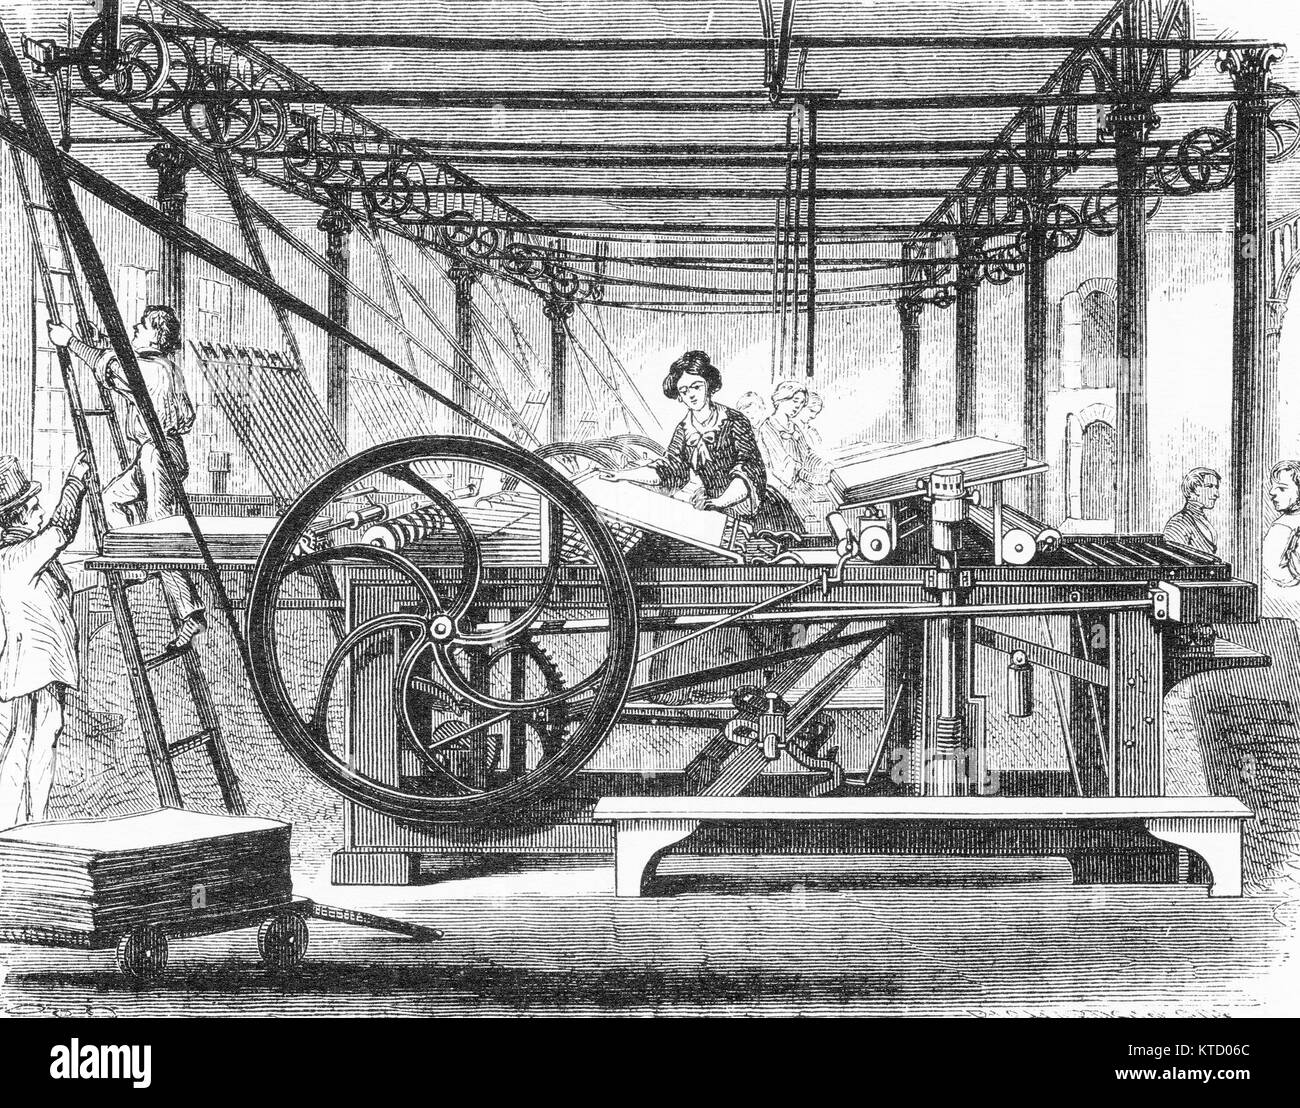 Engraving of workers using the power press at a printing company to print books. From The Harper Establishment, by Jacob Abbott, 1855. Stock Photo